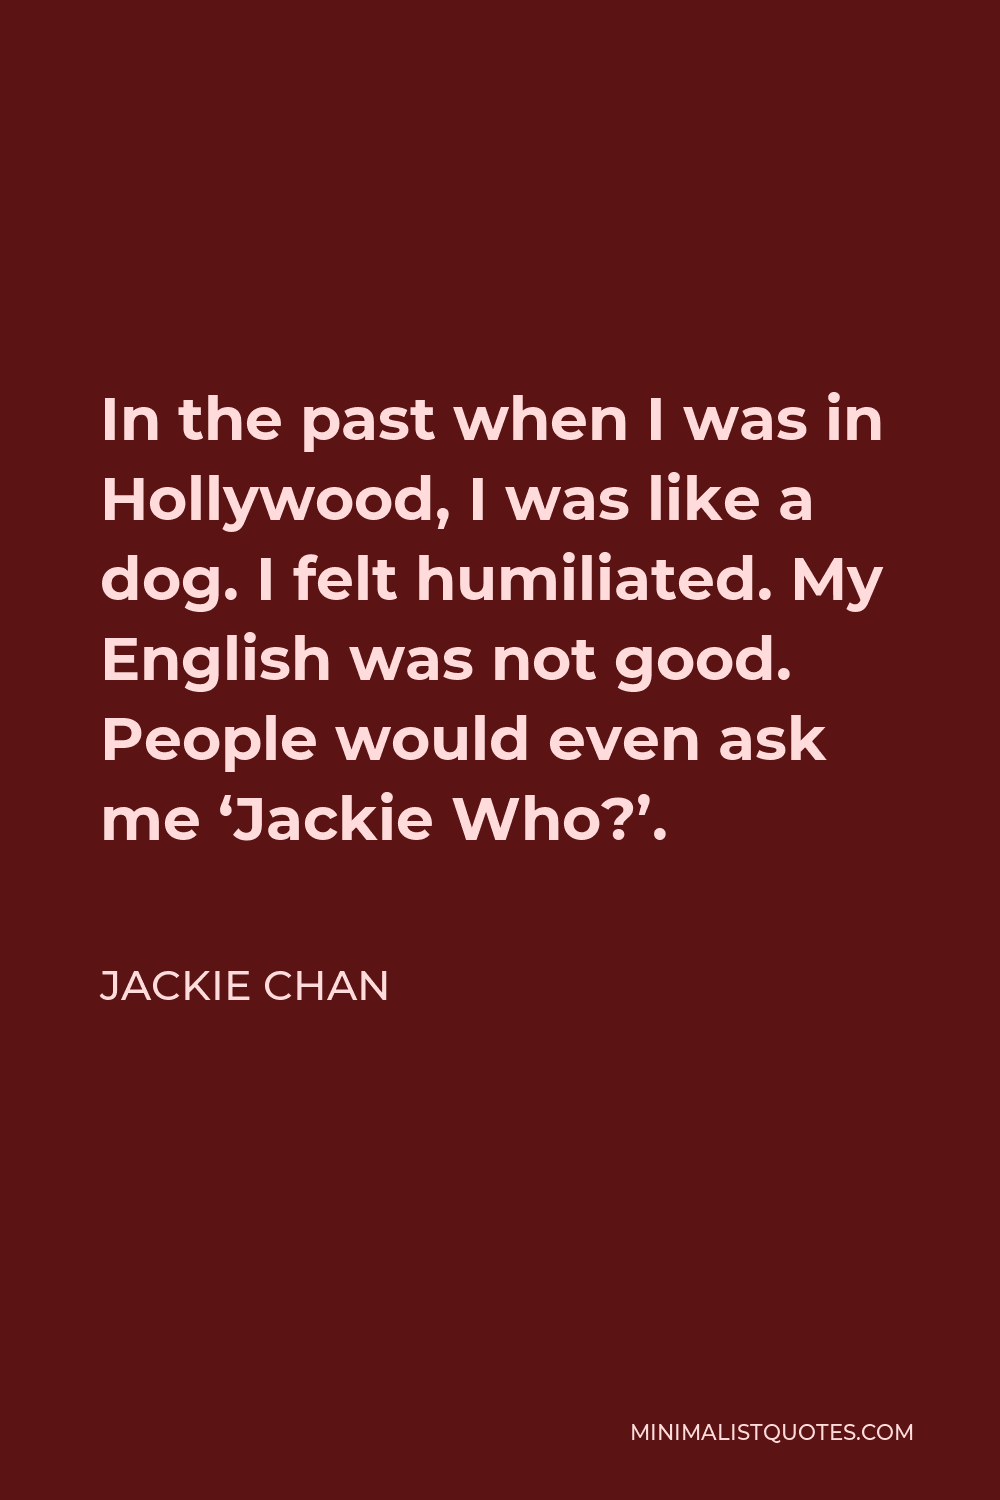 Jackie Chan Quote - In the past when I was in Hollywood, I was like a dog. I felt humiliated. My English was not good. People would even ask me ‘Jackie Who?’.